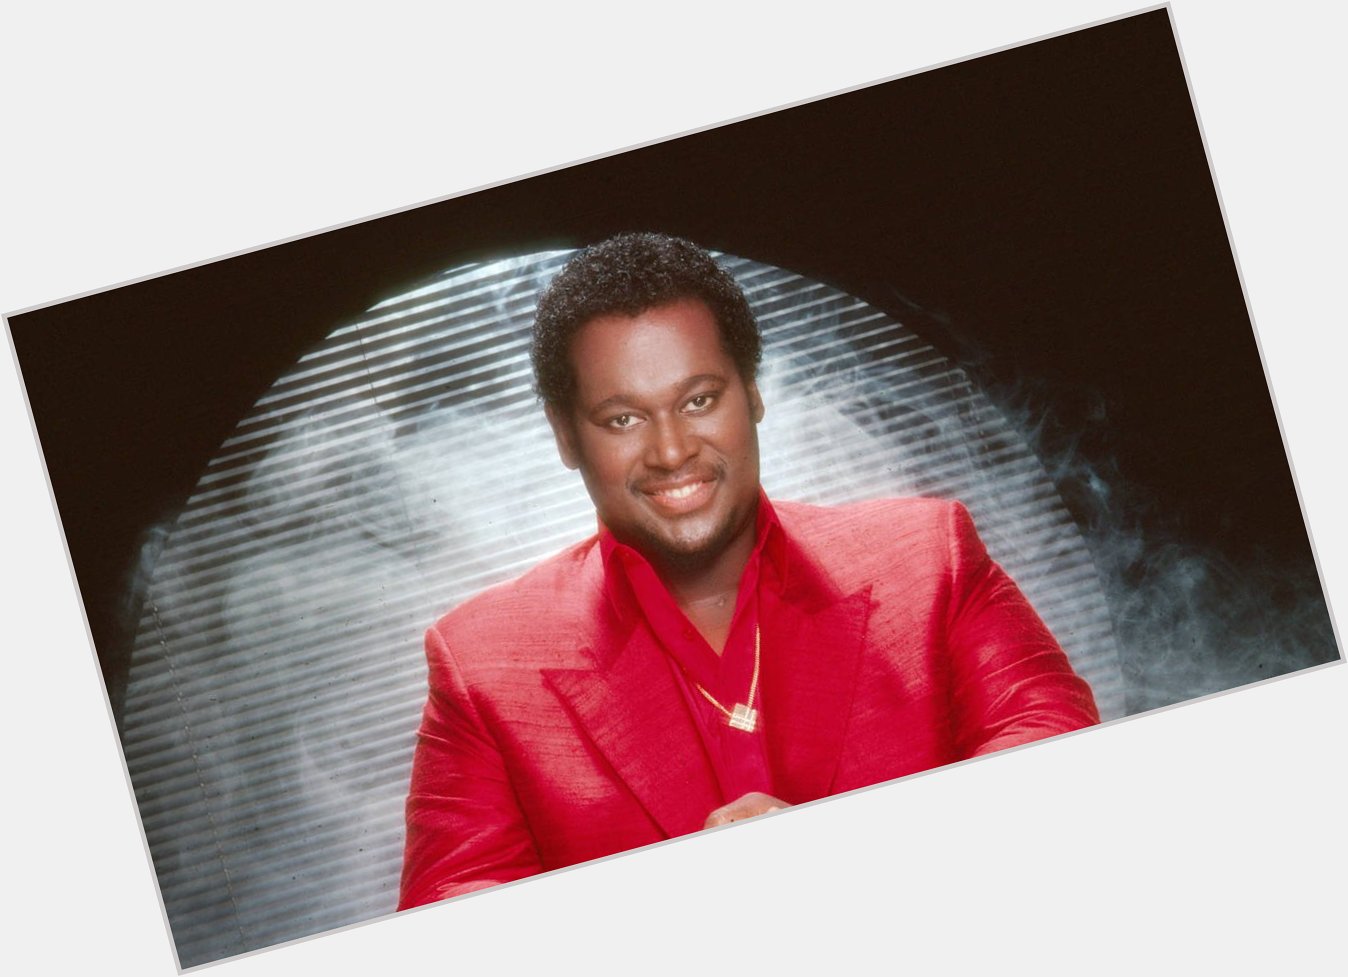 You know damn well this man spiced up the worlds love life. 

Happy 70th Birthday, Luther Vandross! 